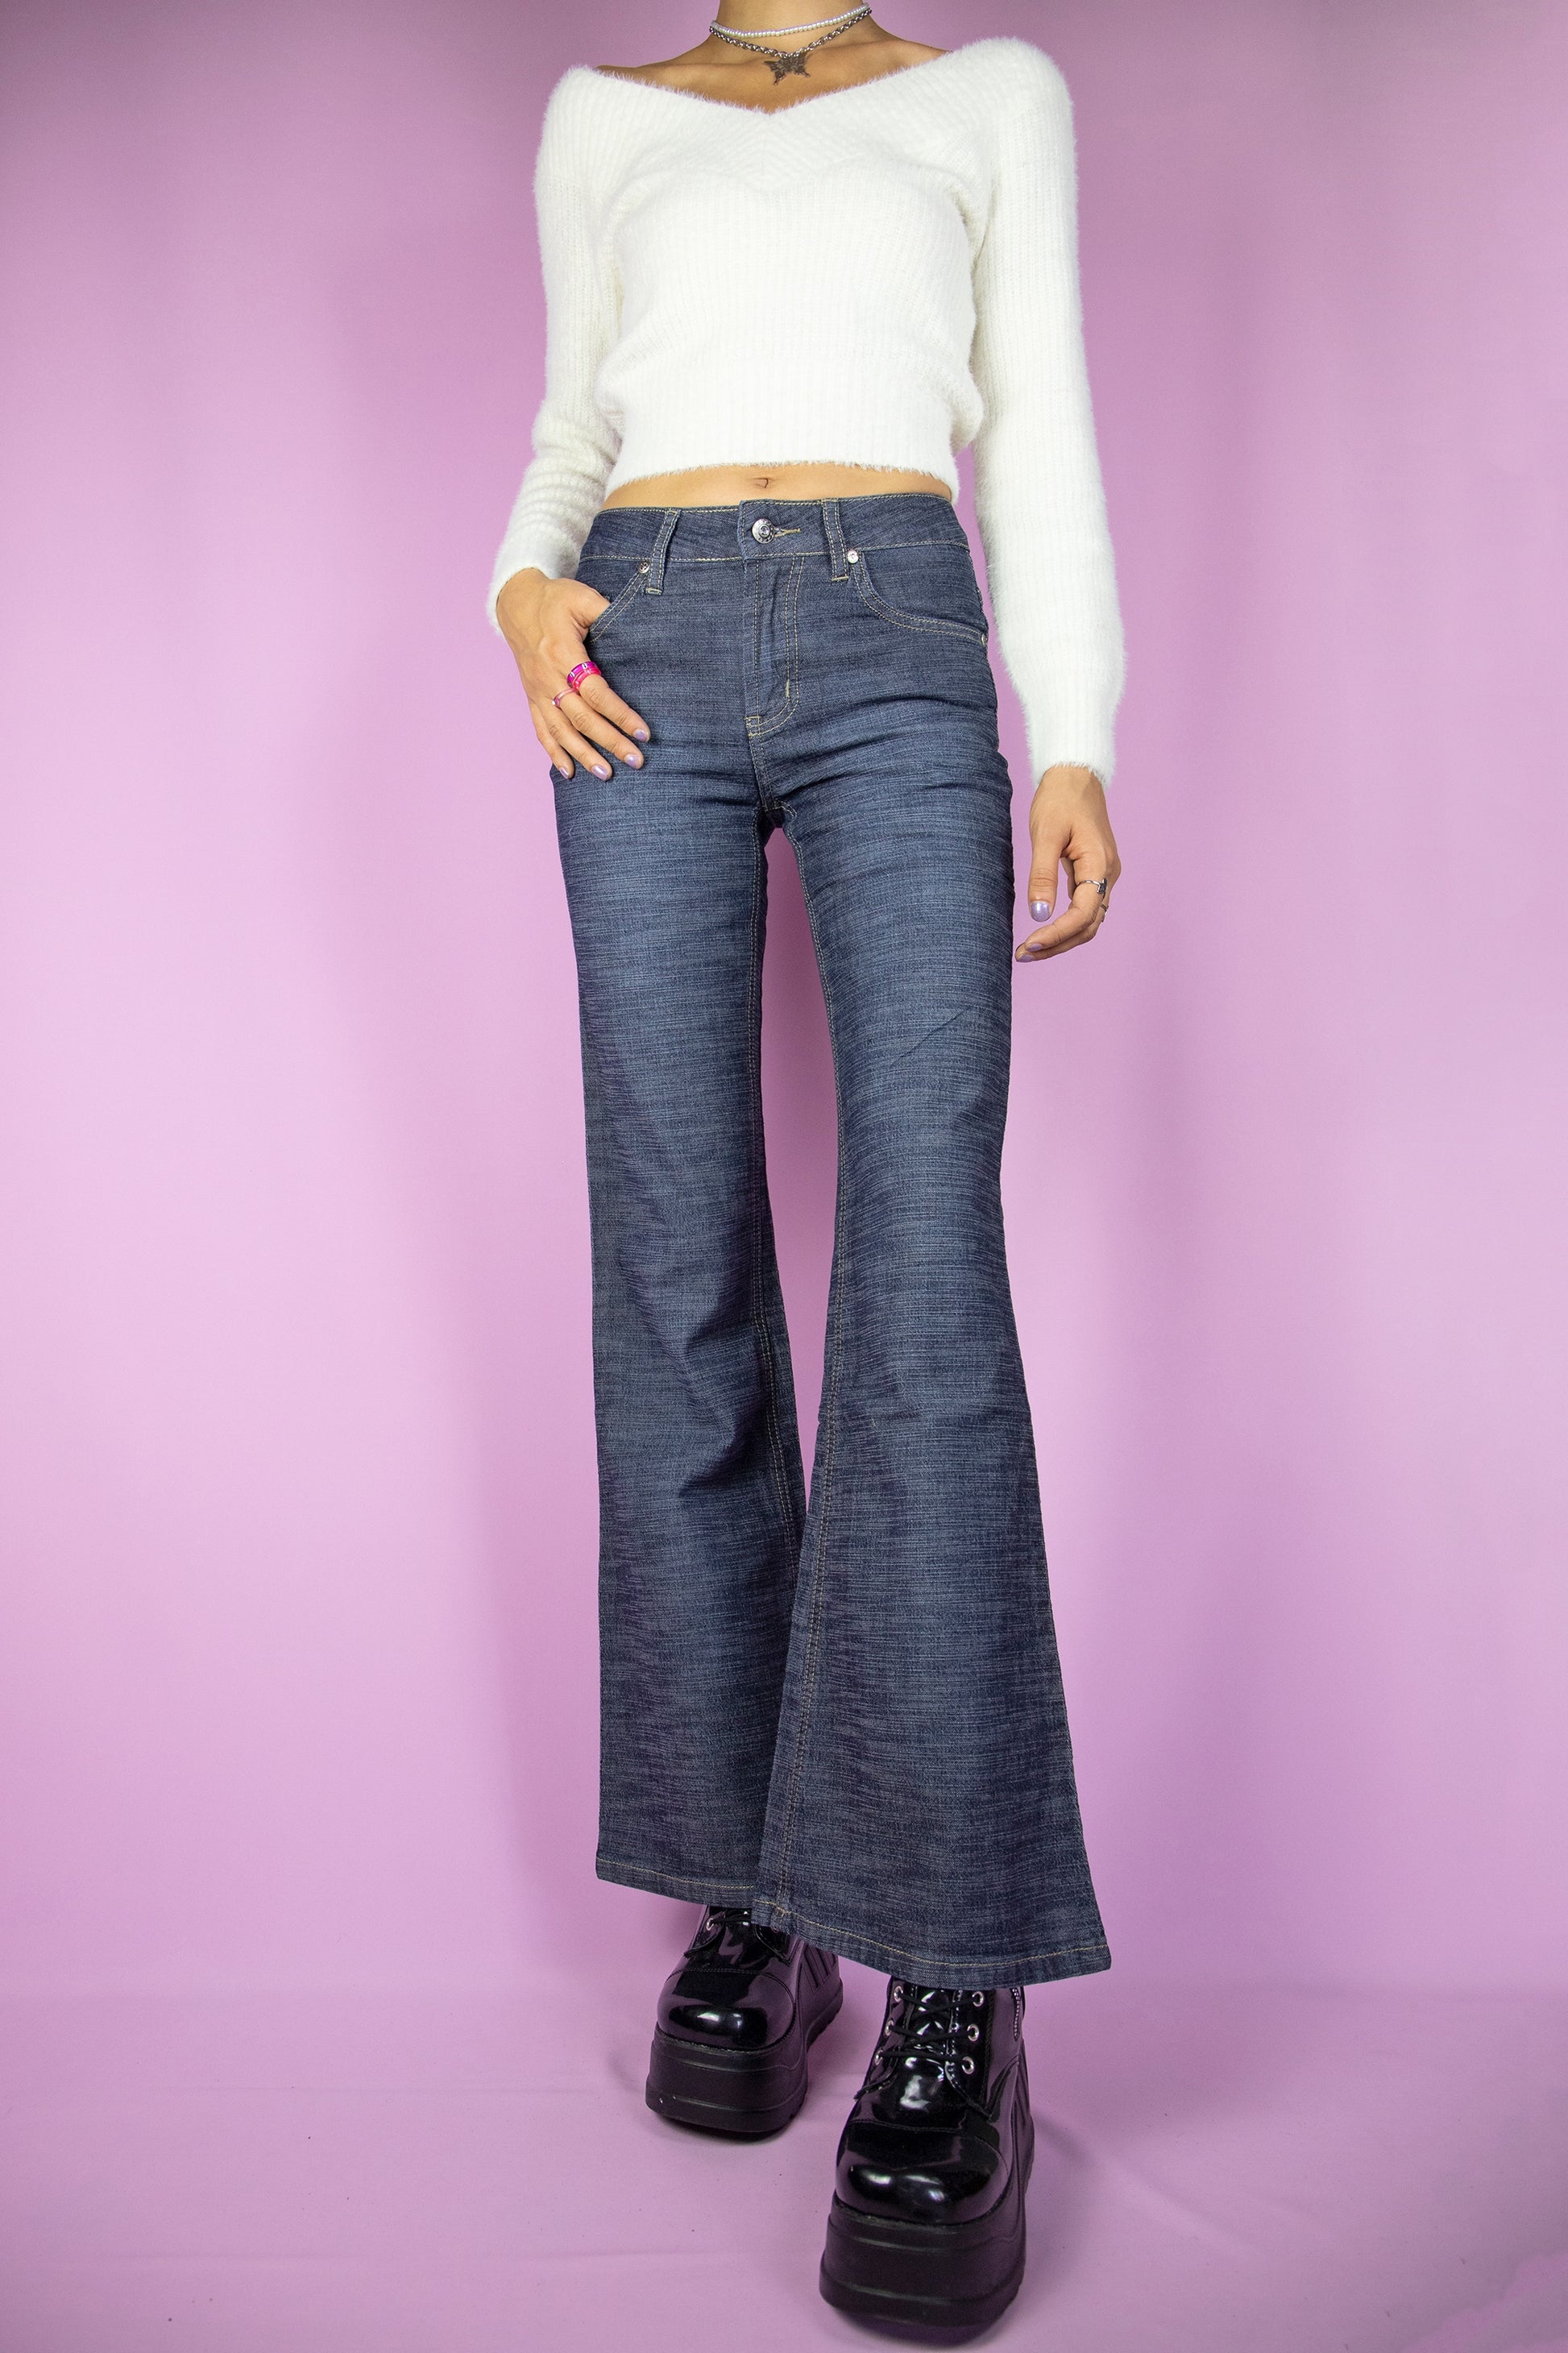 The Y2K Dark Denim Flare Jeans are vintage wide pants with pockets. Cyber grunge 2000s jeans.